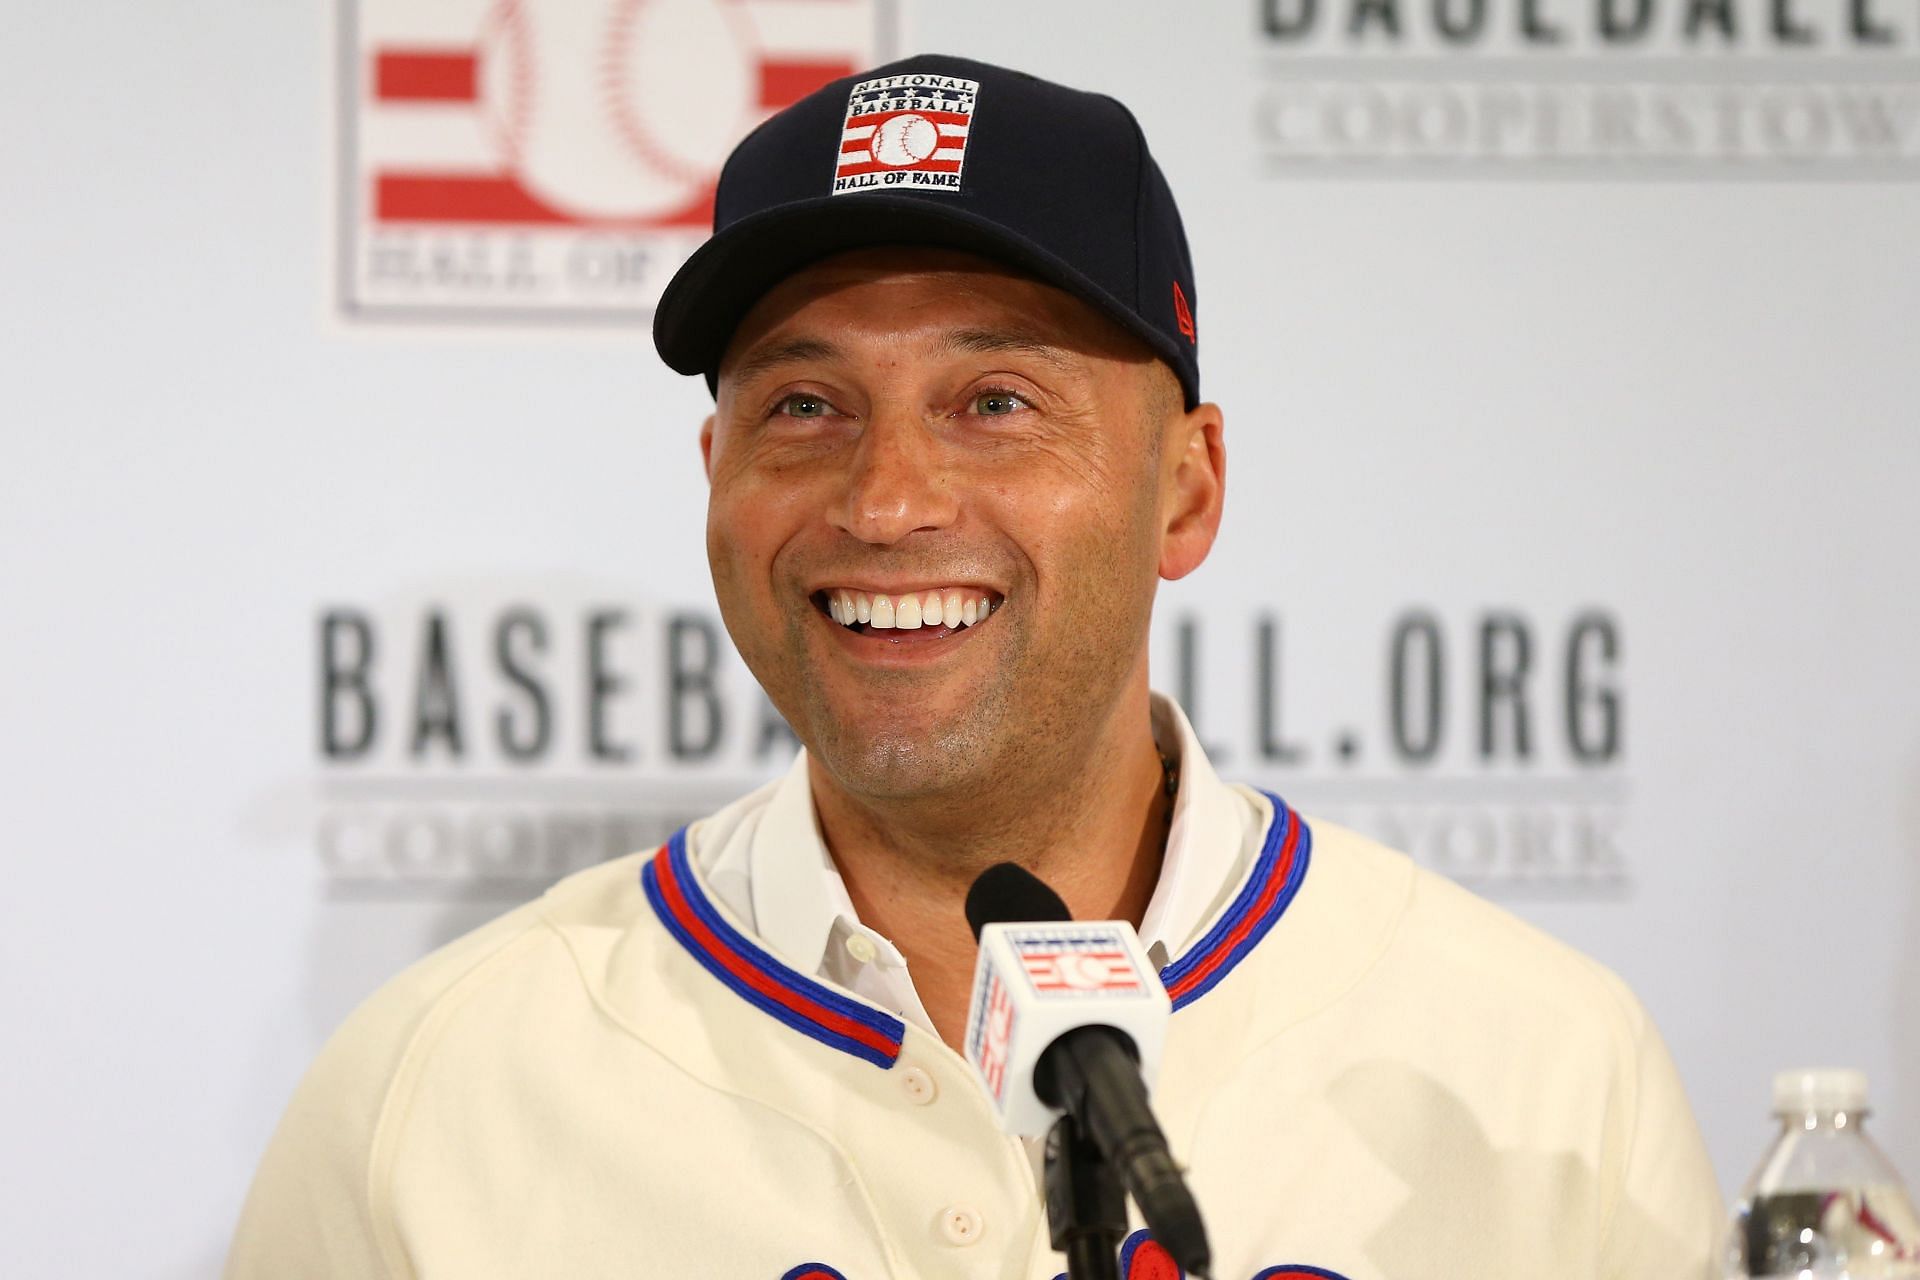 Derek Jeter Is The Cover Athlete For The MLB The Show 23 The